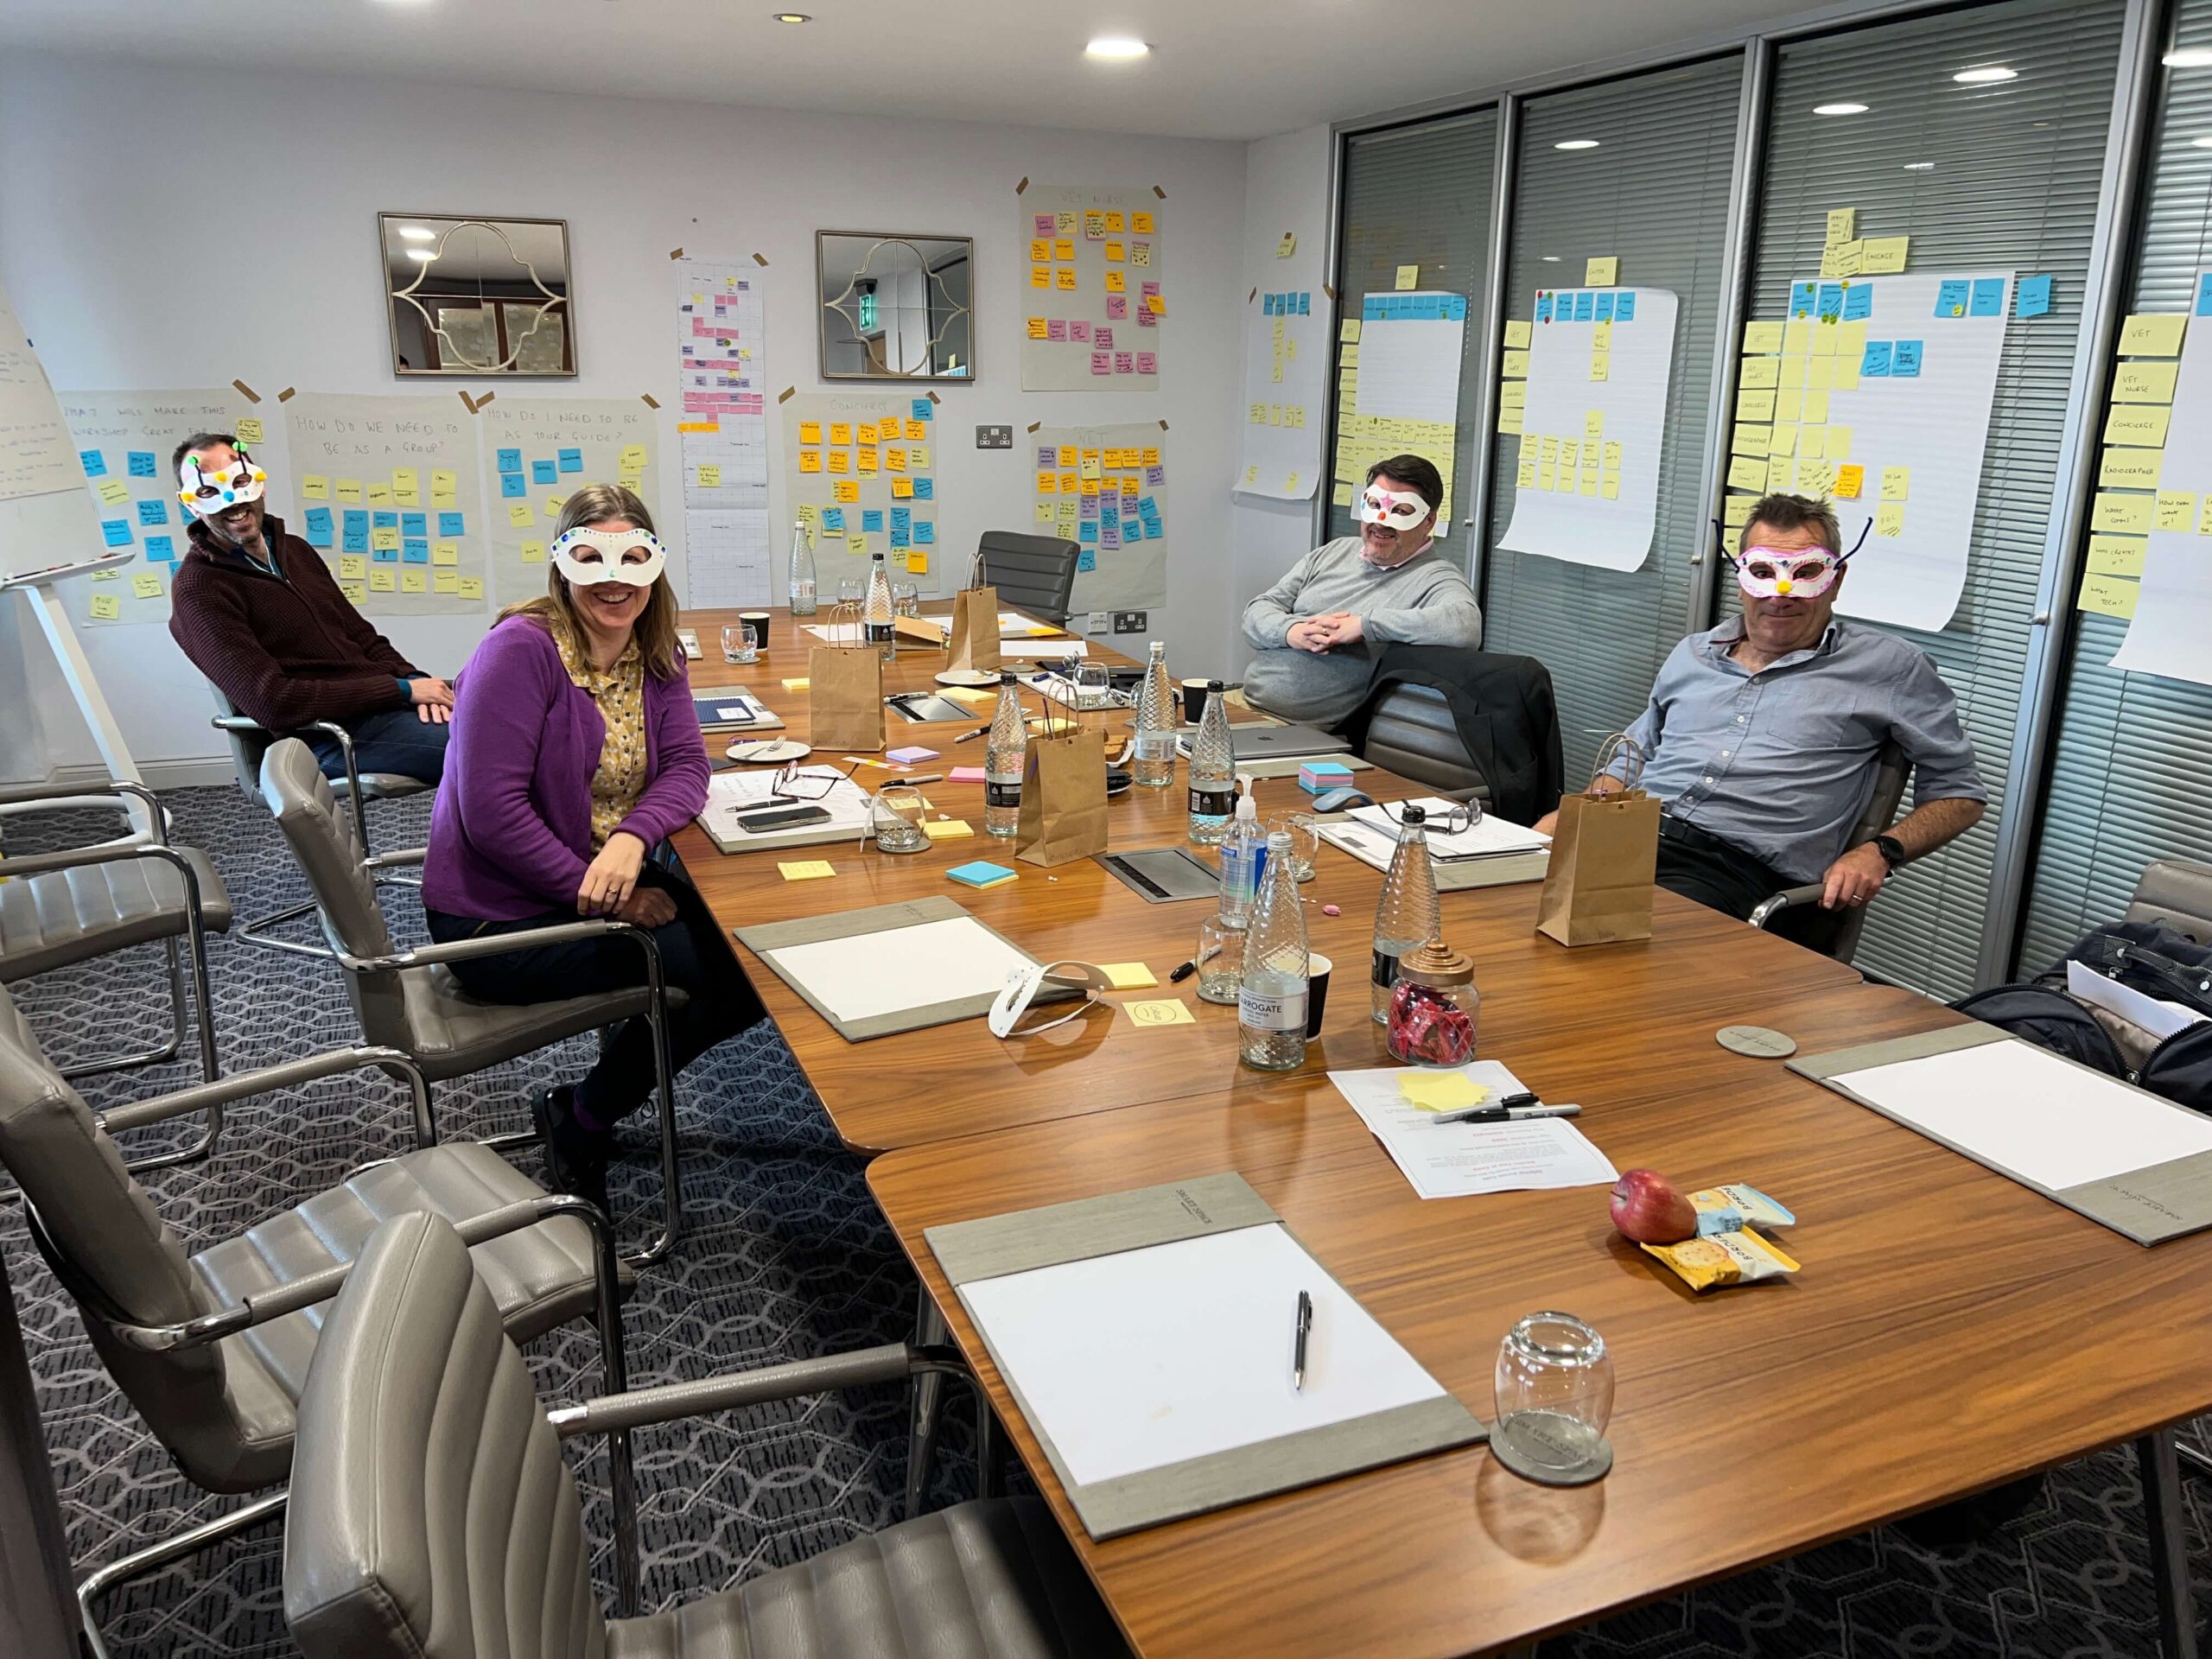 Three vets and one consultant wearing decorated eye masks in a recruitment workshop. Cementing the importance of always looking behind the mask when interviewing.